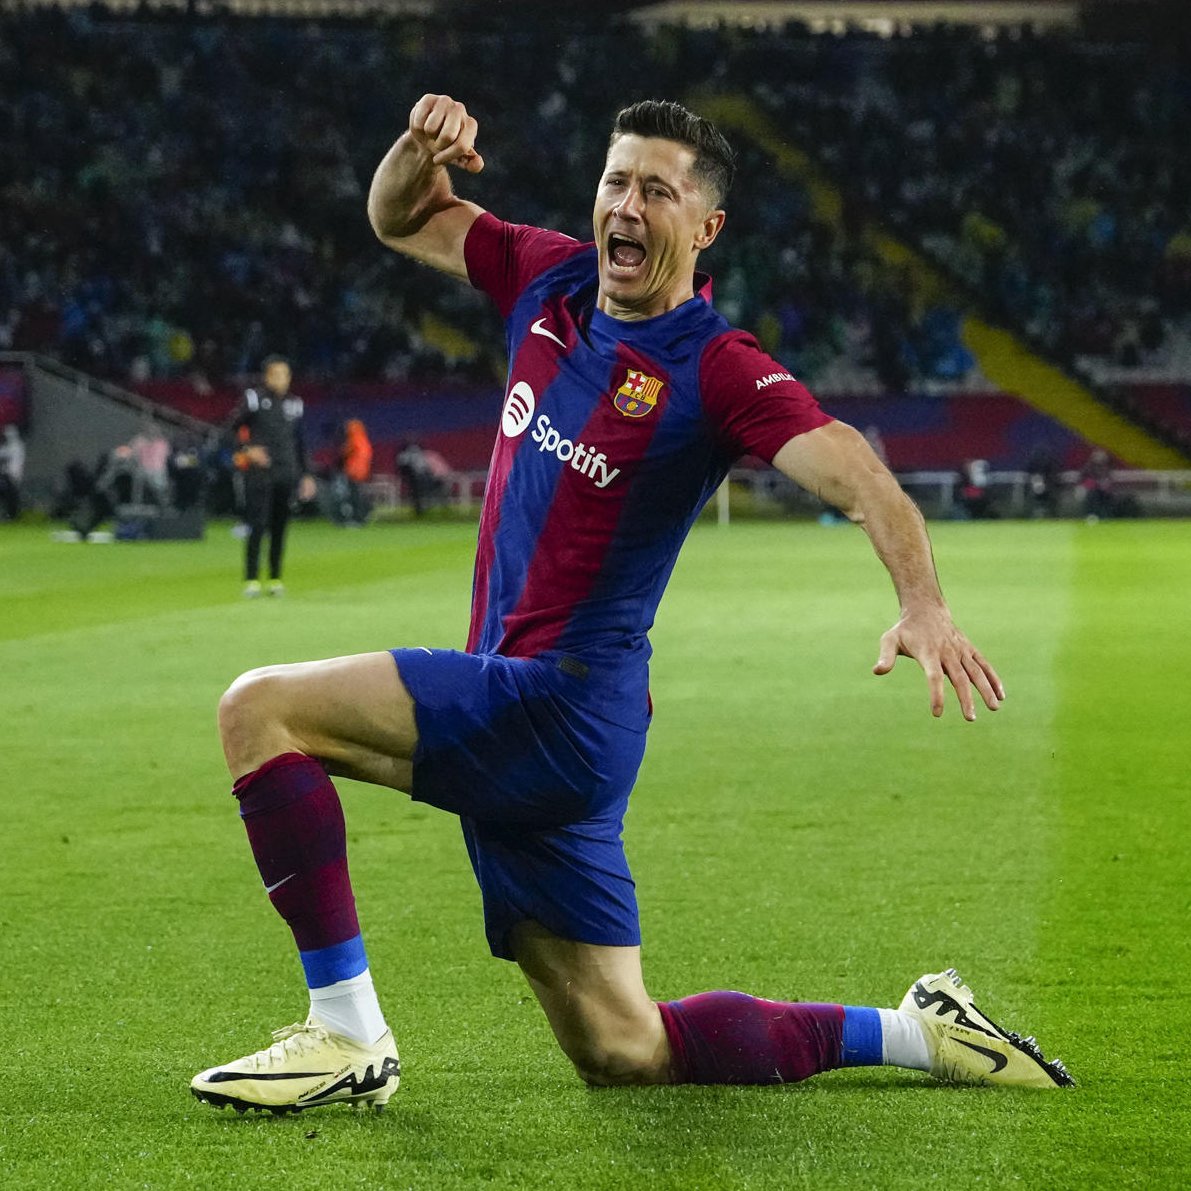 🔎 | FOCUS Robert Lewandowski led Barcelona's comeback against ten-man Valencia (4–2) tonight: 👌 27 touches ⚽️ 3 goals 🎯 5 shots/5 on target (0.65 xG) 👟 7/9 accurate passes (0.11 xA) 🏔️ 2/4 aerial duels won 📈 9.3 Sofascore Rating His first hat-trick since September 2022!